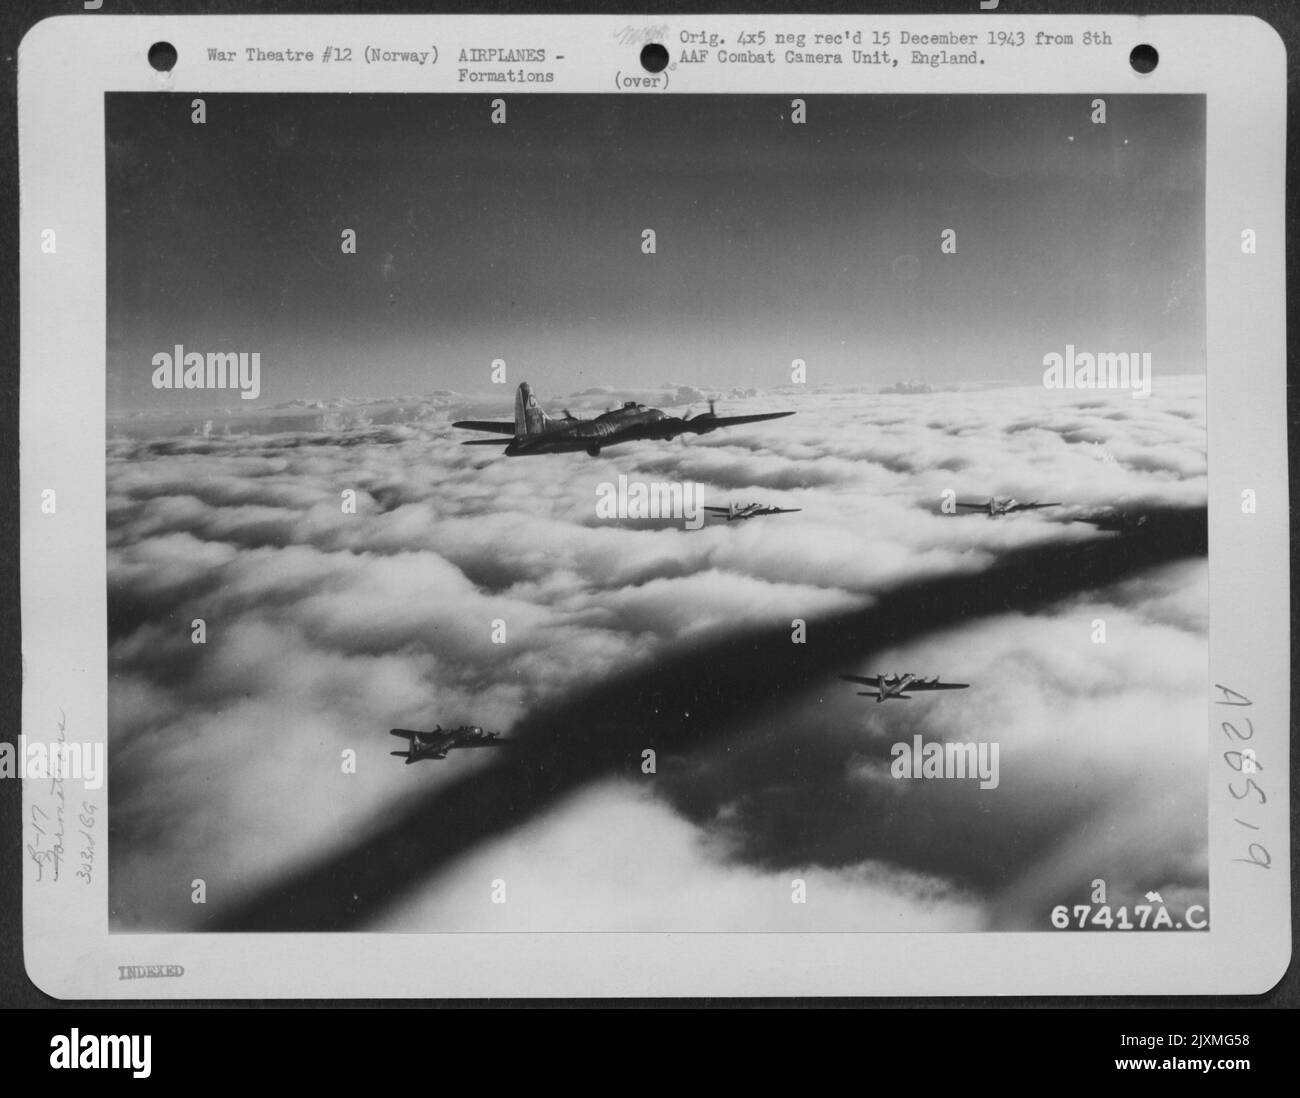 Flying high above a blanket of fleecy clouds, a formation of 8th Air Force Boeing B-17 'Flying Fortresses' drones steadily on toward the target somewhere in Norway on 16 November 1943. Stock Photo